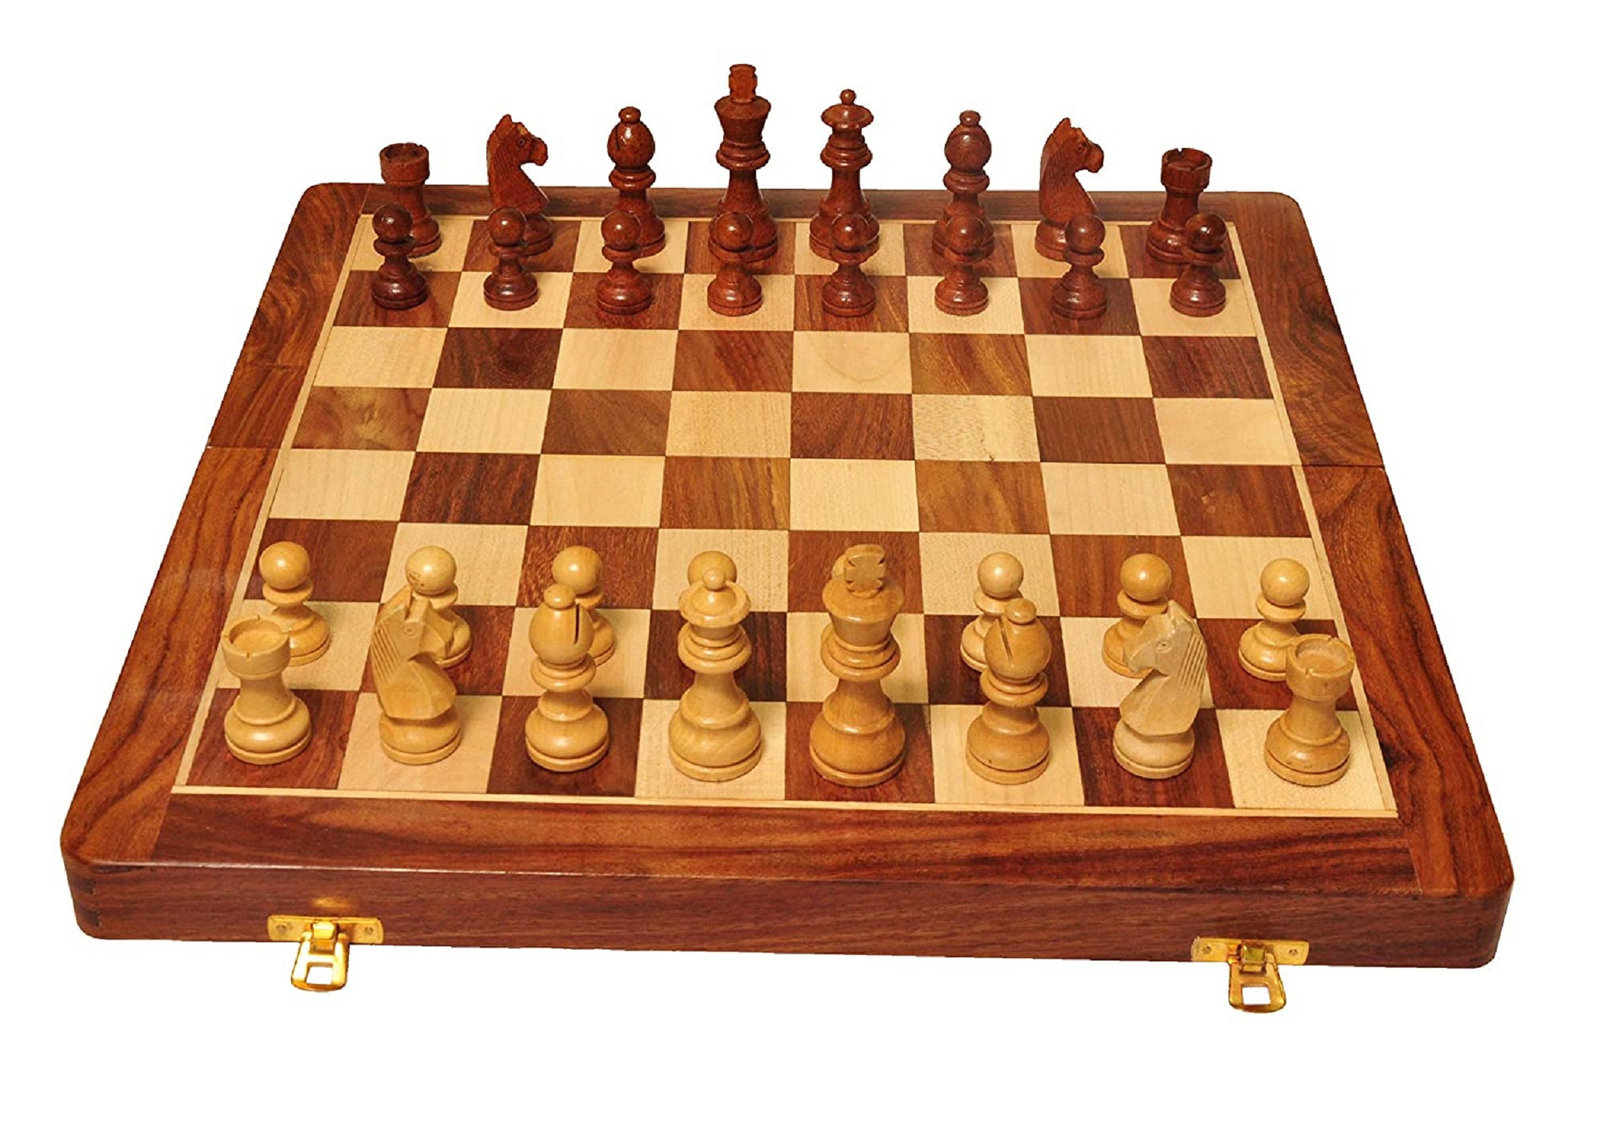 NEW 7" HANDMADE TOP QUALITY MAGNETIC WOODEN CHESS SET GIFT ITEM 